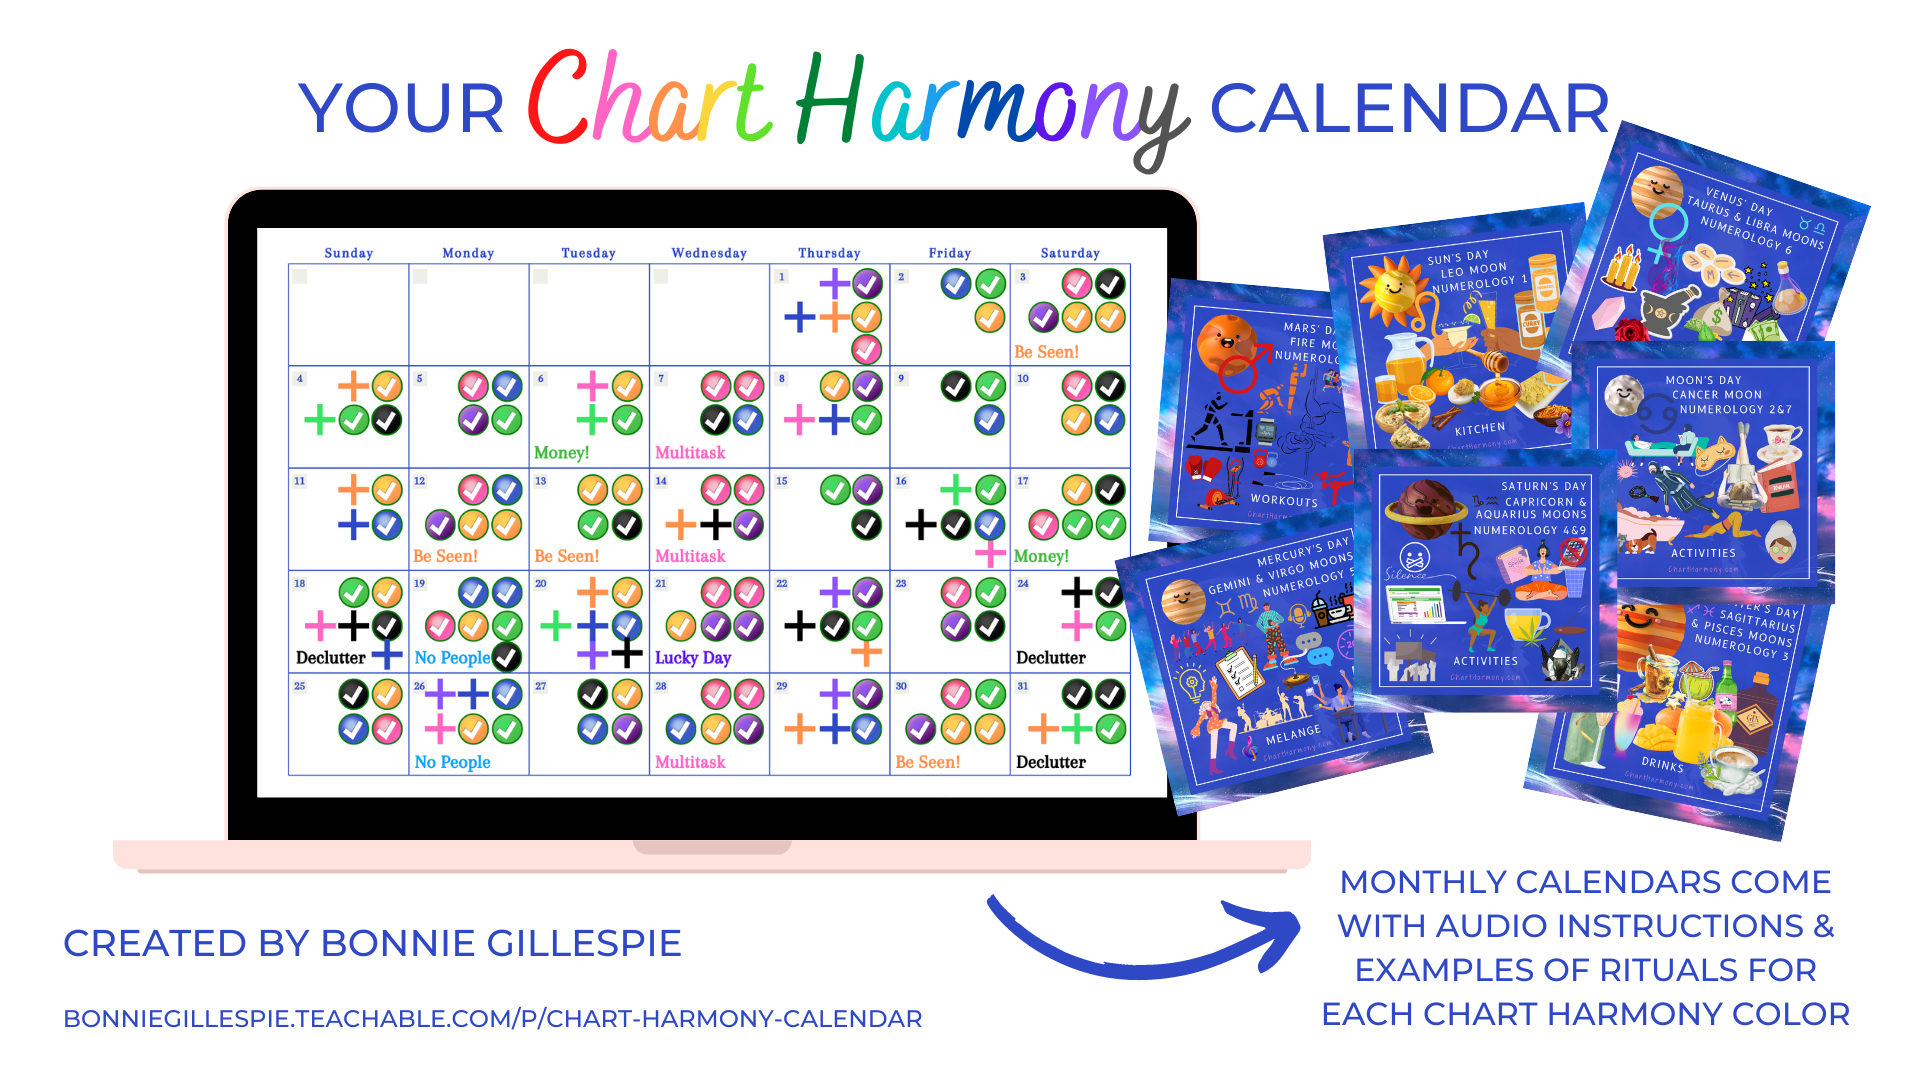 Chart Harmony Calendar on laptop screen, Chart Harmony rituals and remedies on quick-reference cards in foreground